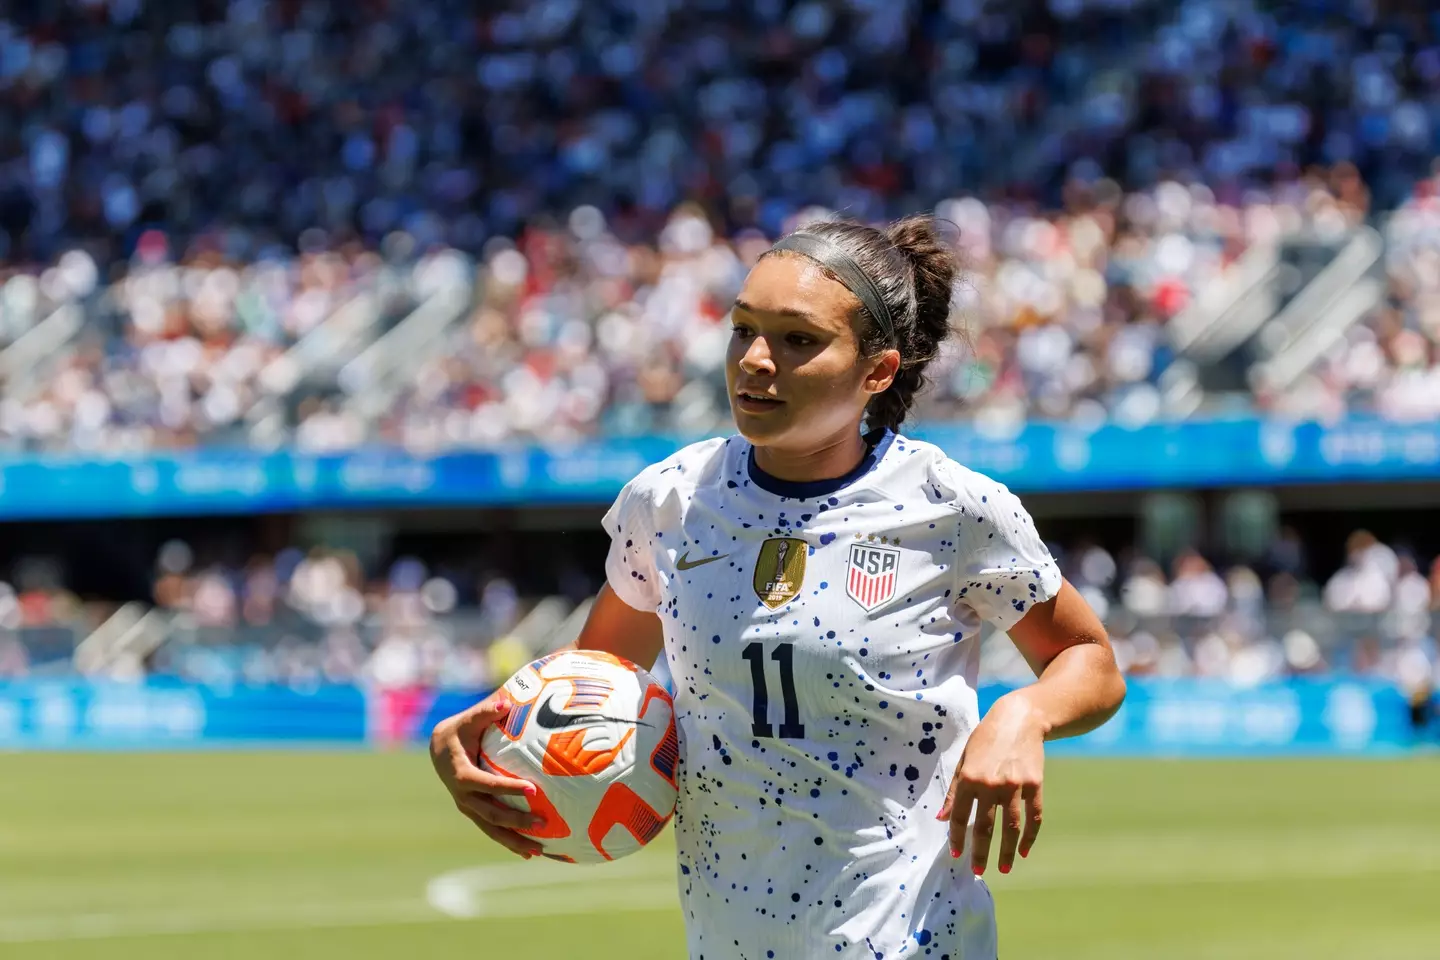 Smith could lead USA to a third World Cup on the bounce. Image: Getty